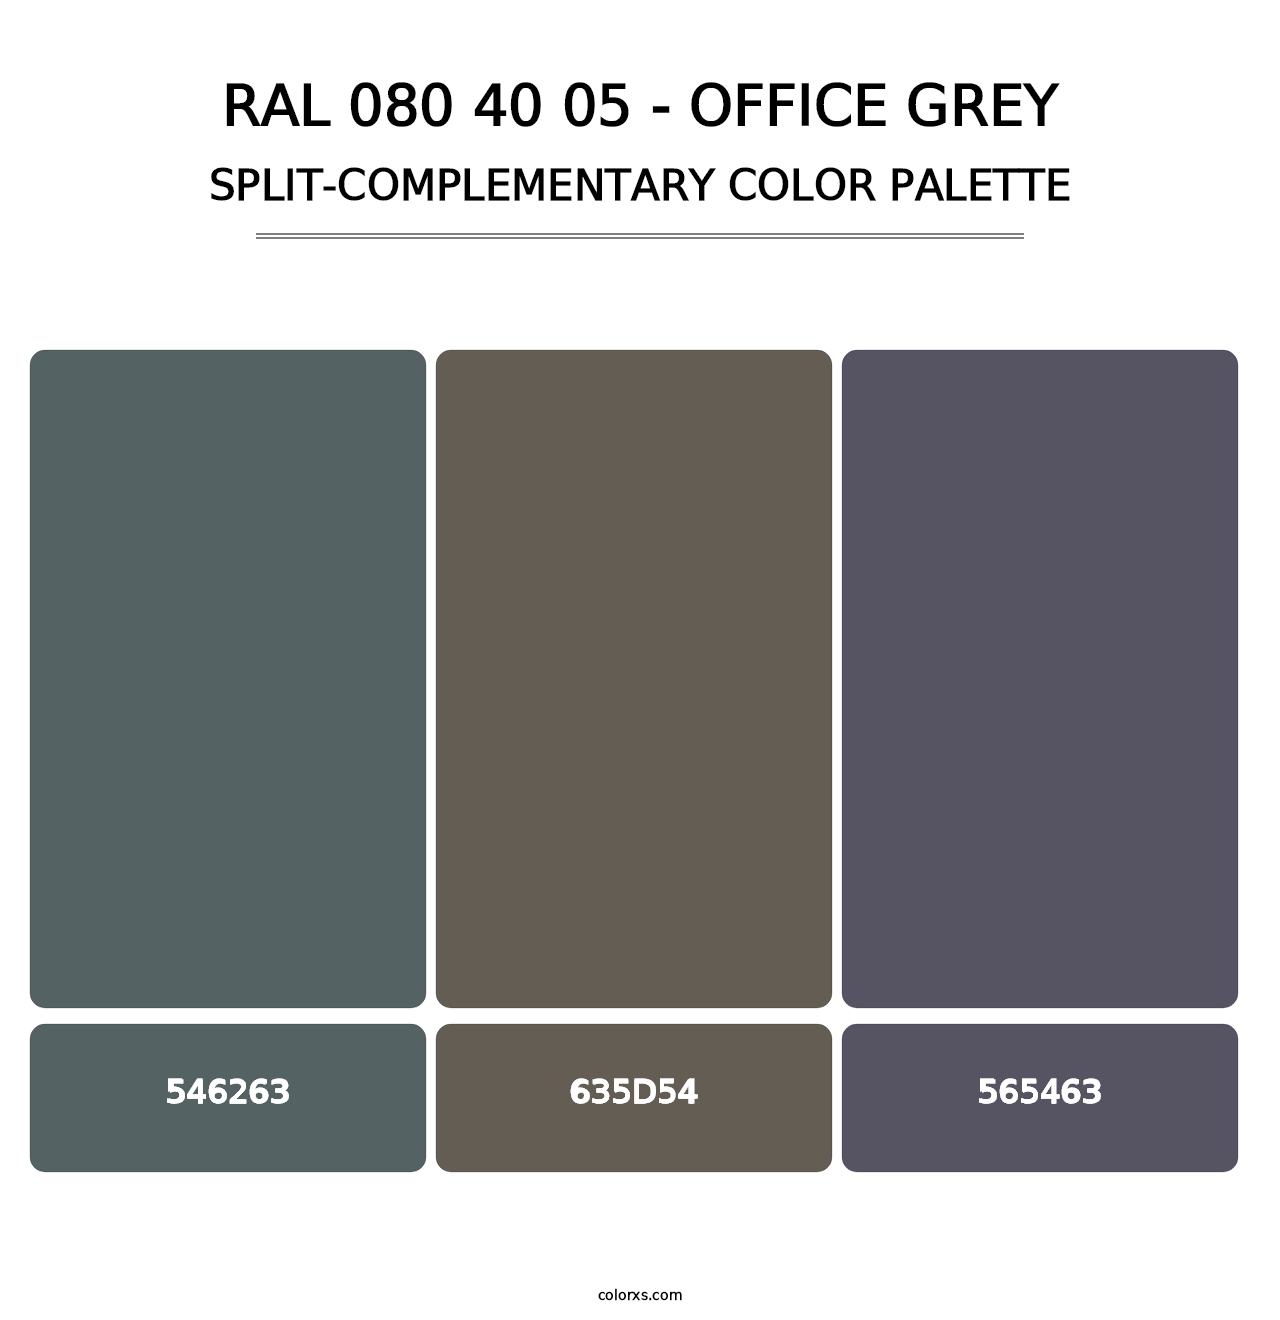 RAL 080 40 05 - Office Grey - Split-Complementary Color Palette